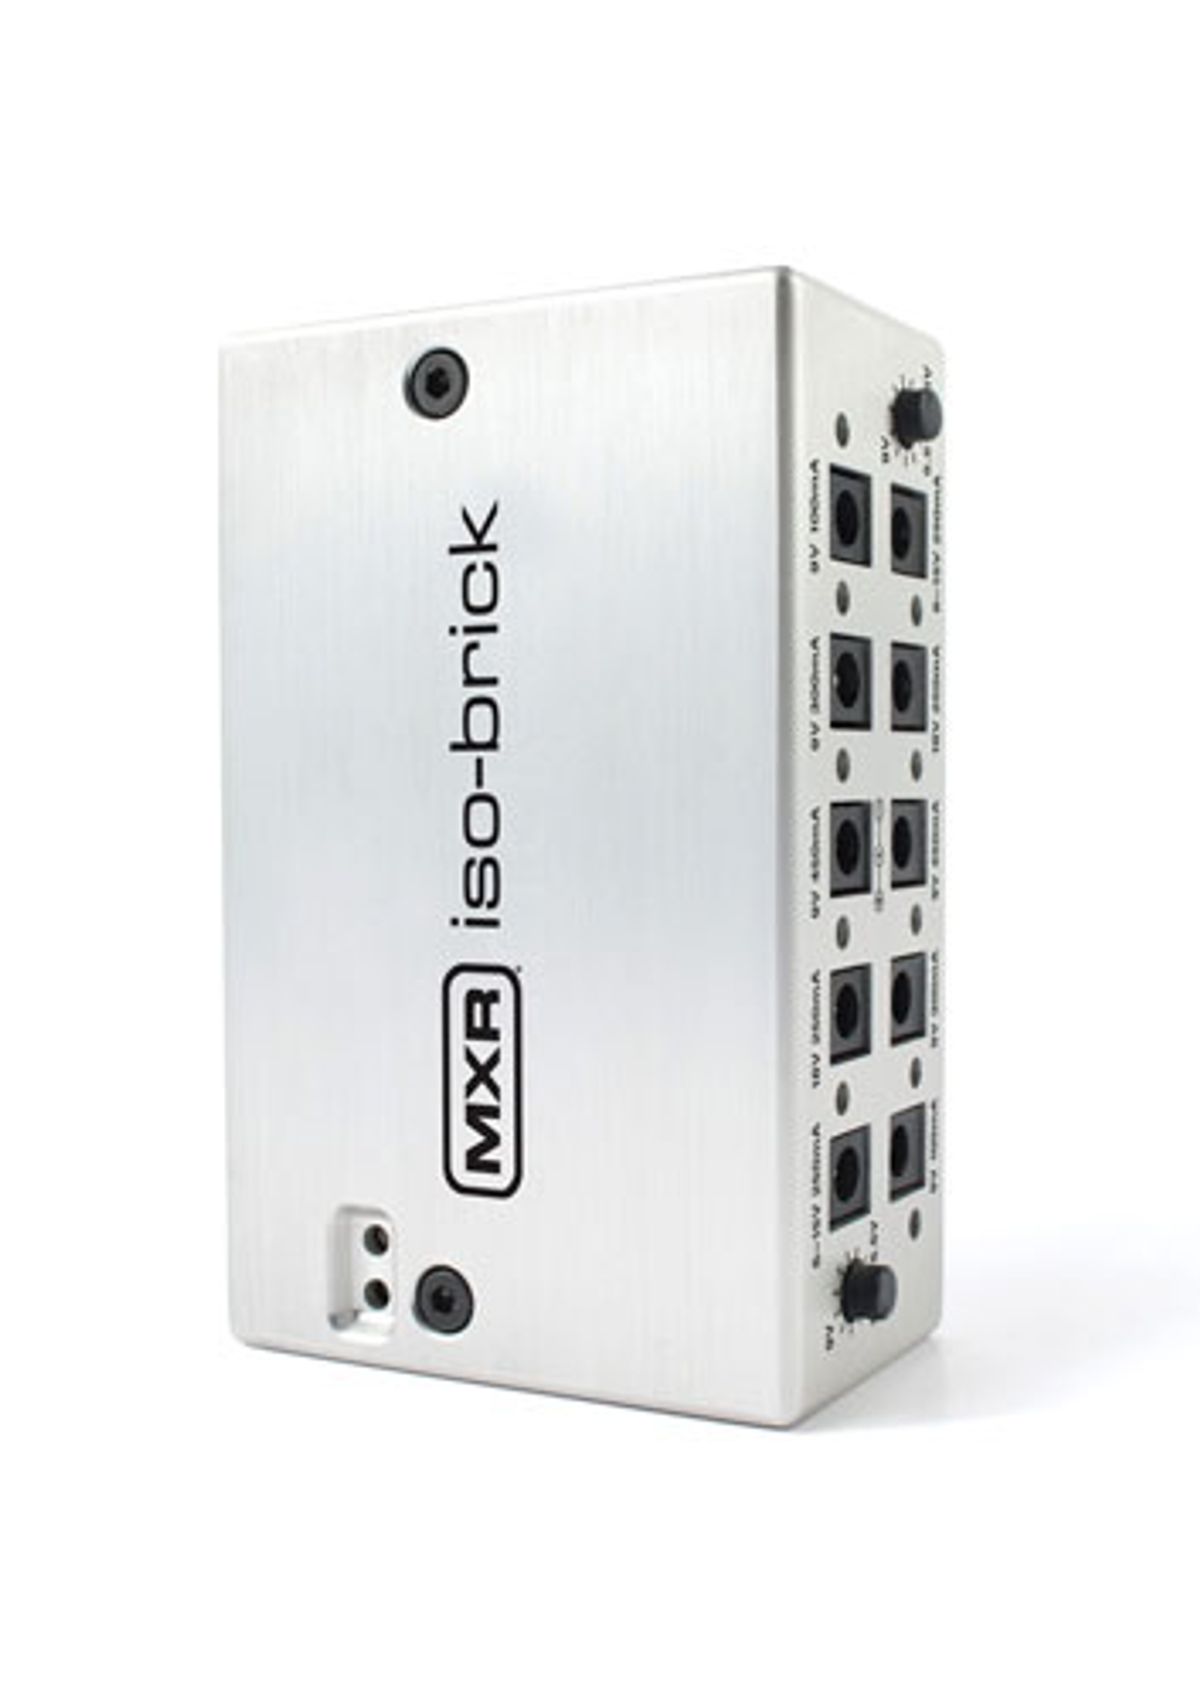 Dunlop Introduces the MXR Iso-Brick Power Supply